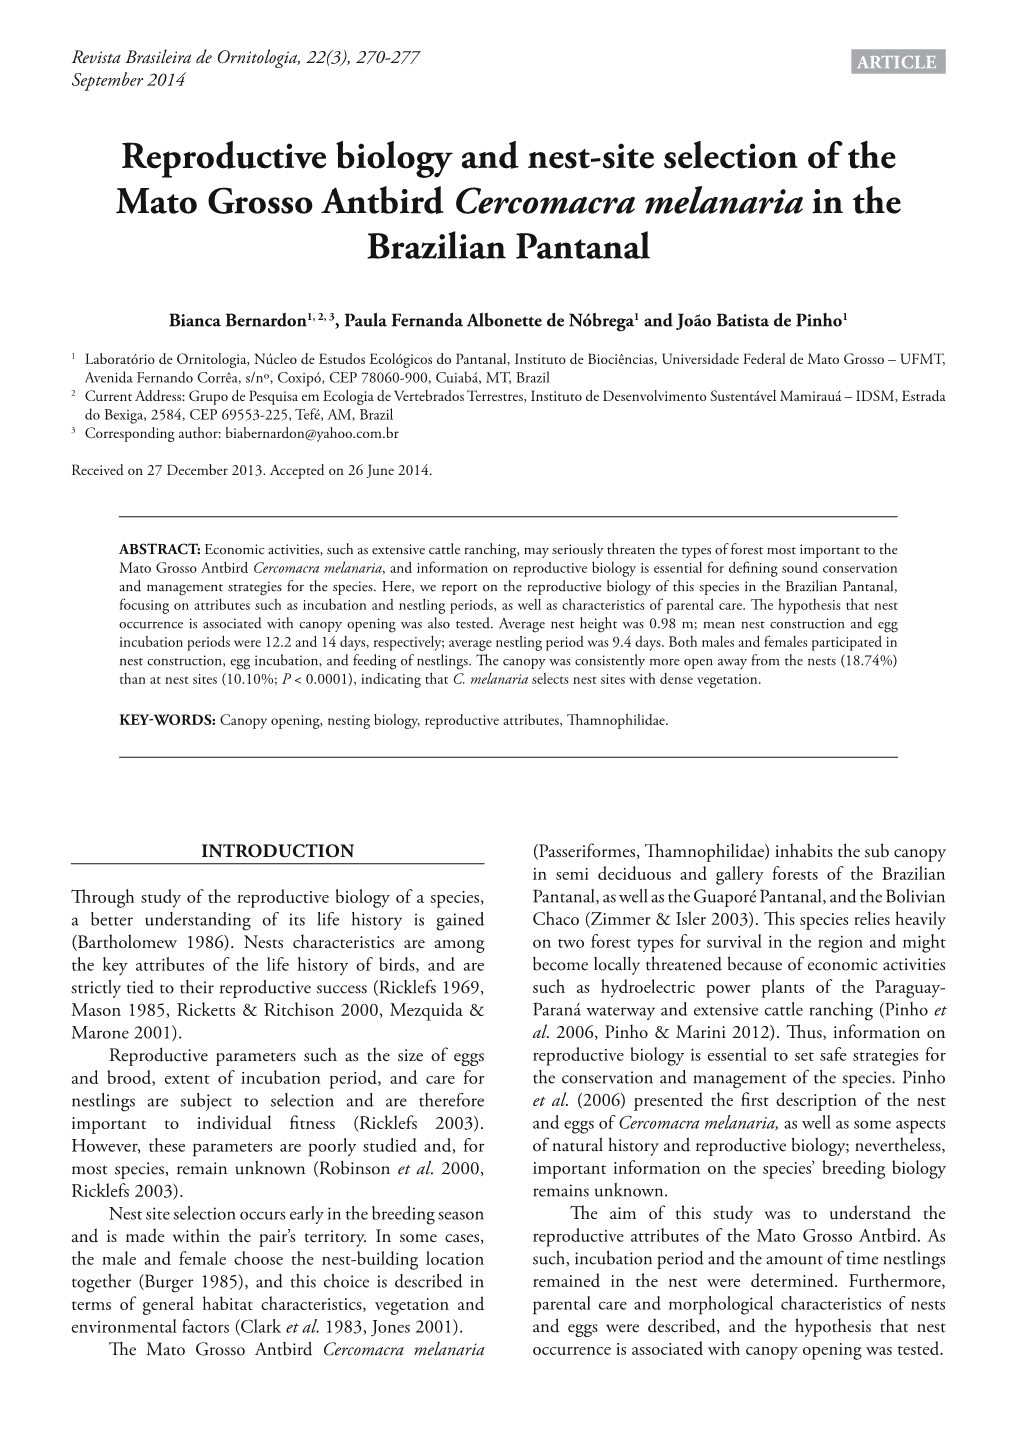 Reproductive Biology and Nest-Site Selection of the Mato Grosso Antbird Cercomacra Melanaria in the Brazilian Pantanal